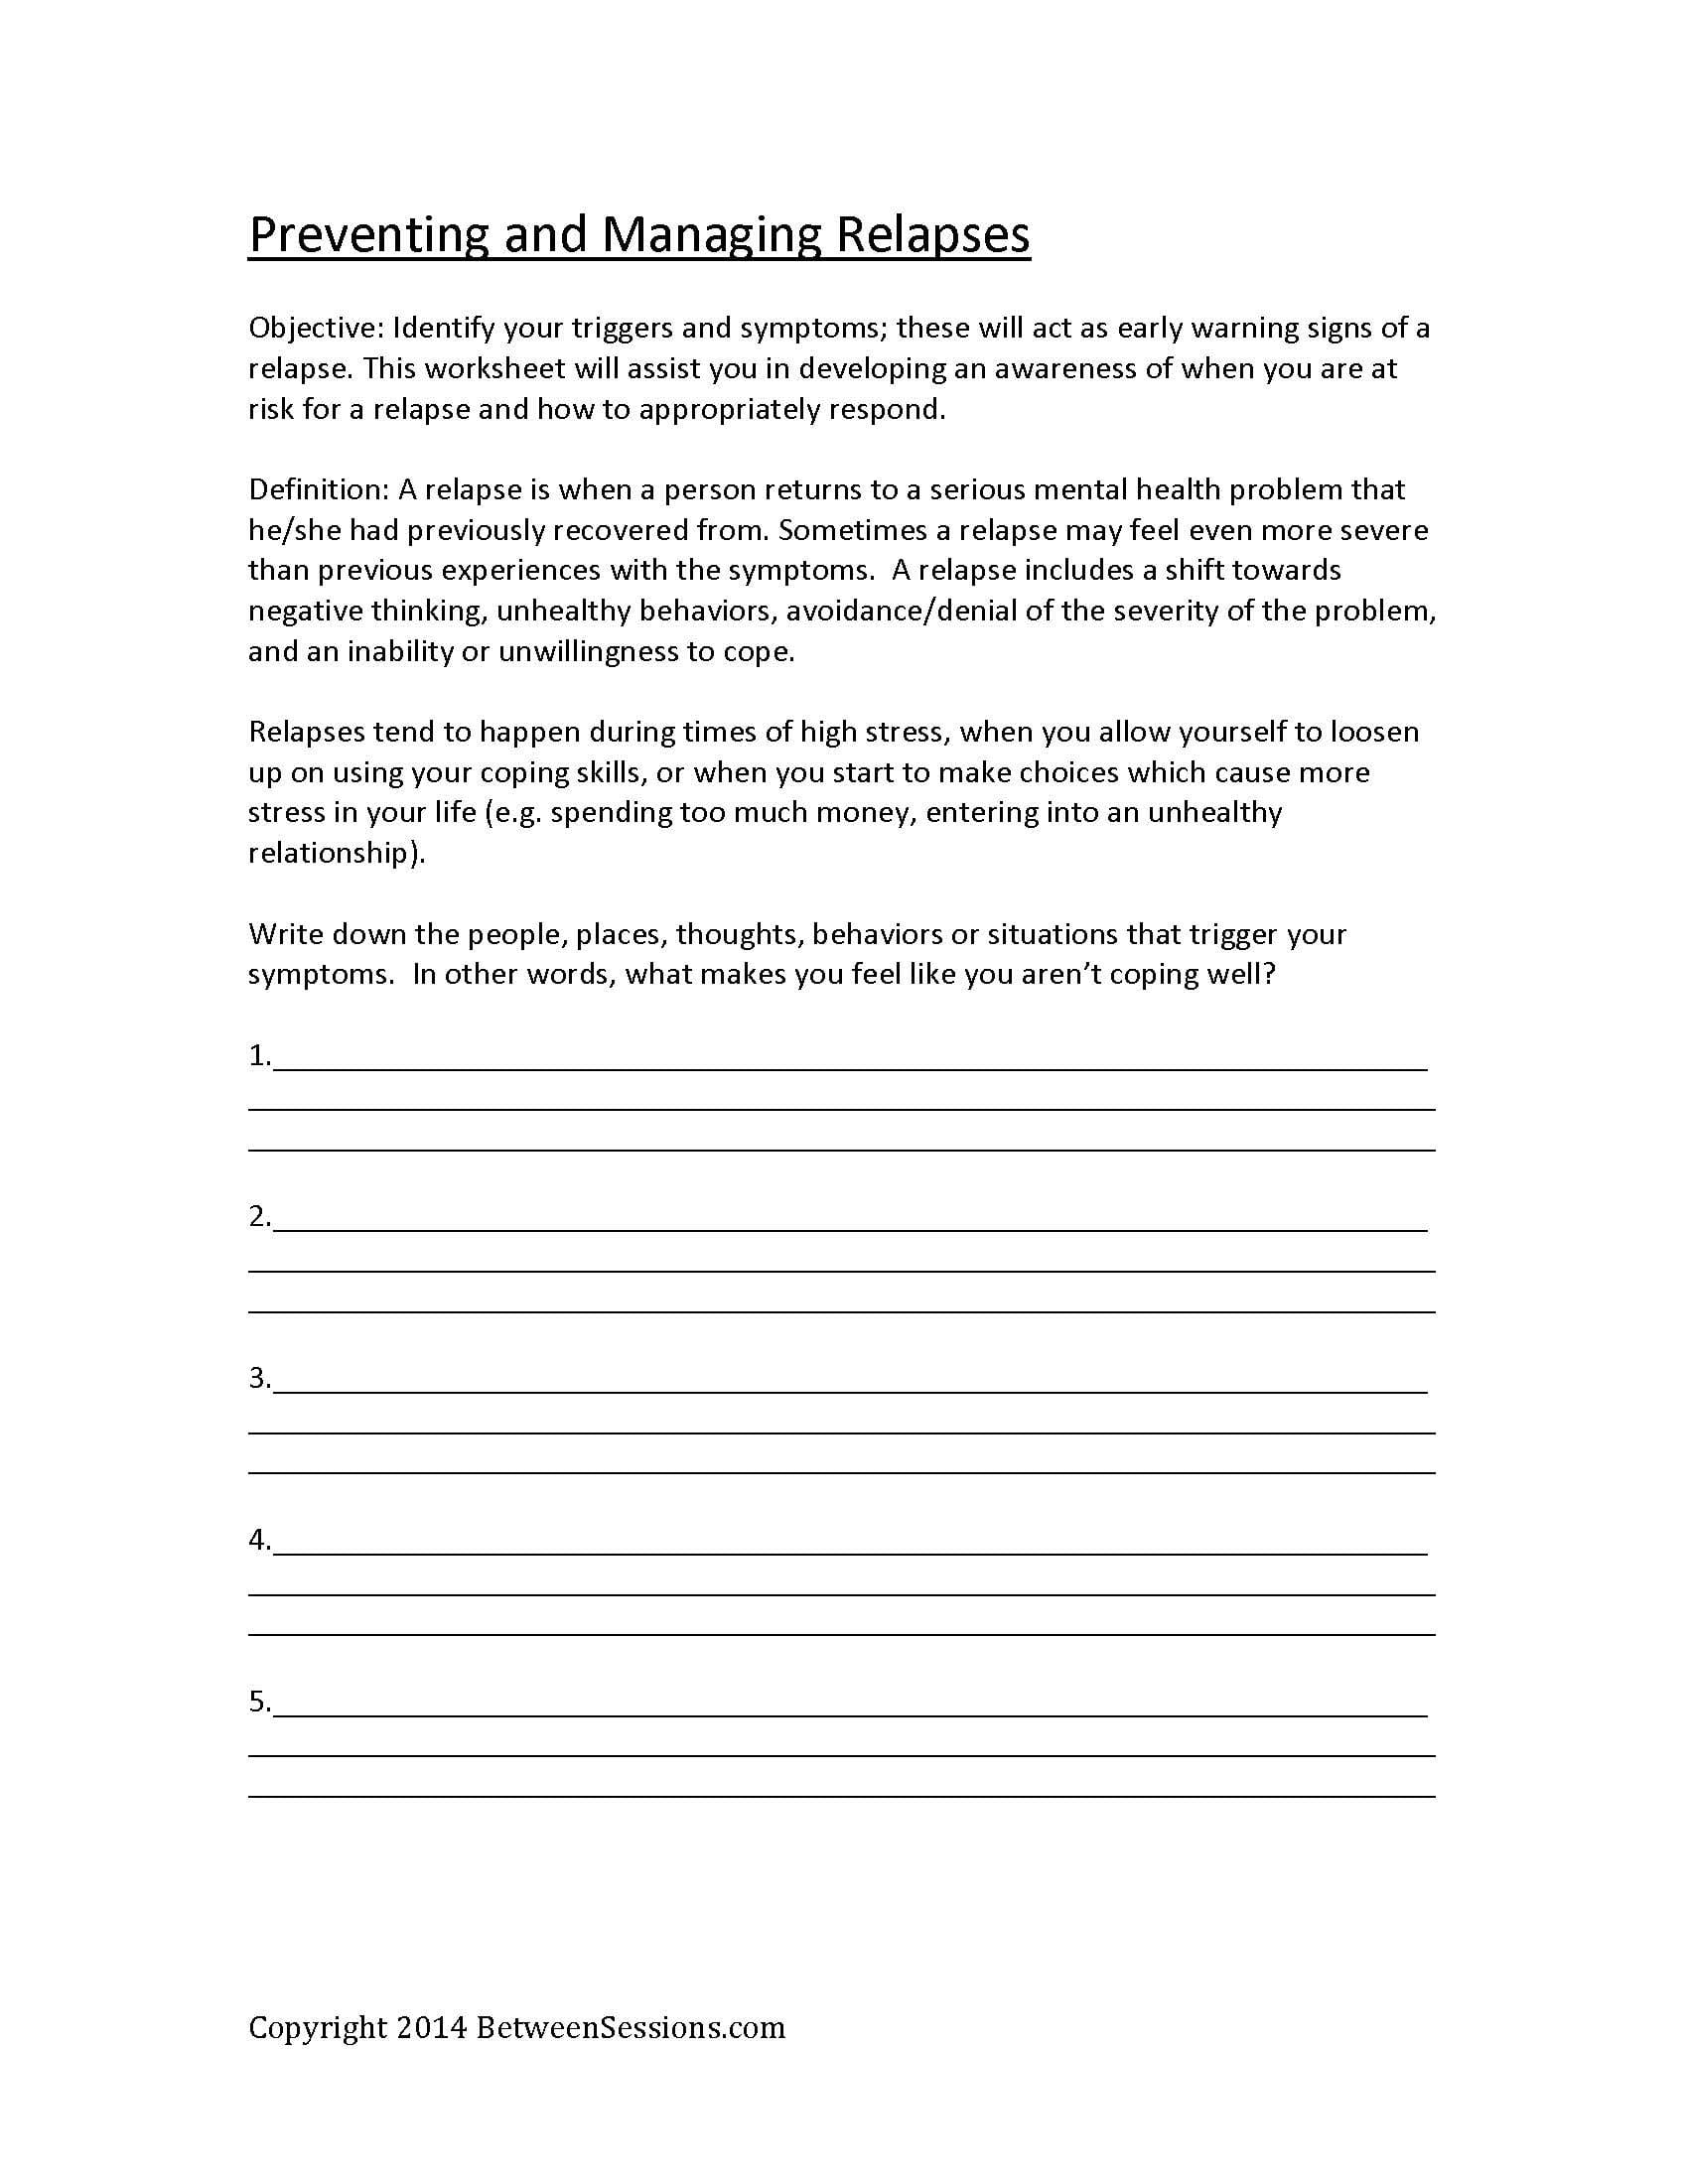 Between Sessions Anger Management Worksheets For Adults  Anger With Regard To Anxiety Worksheets For Adults